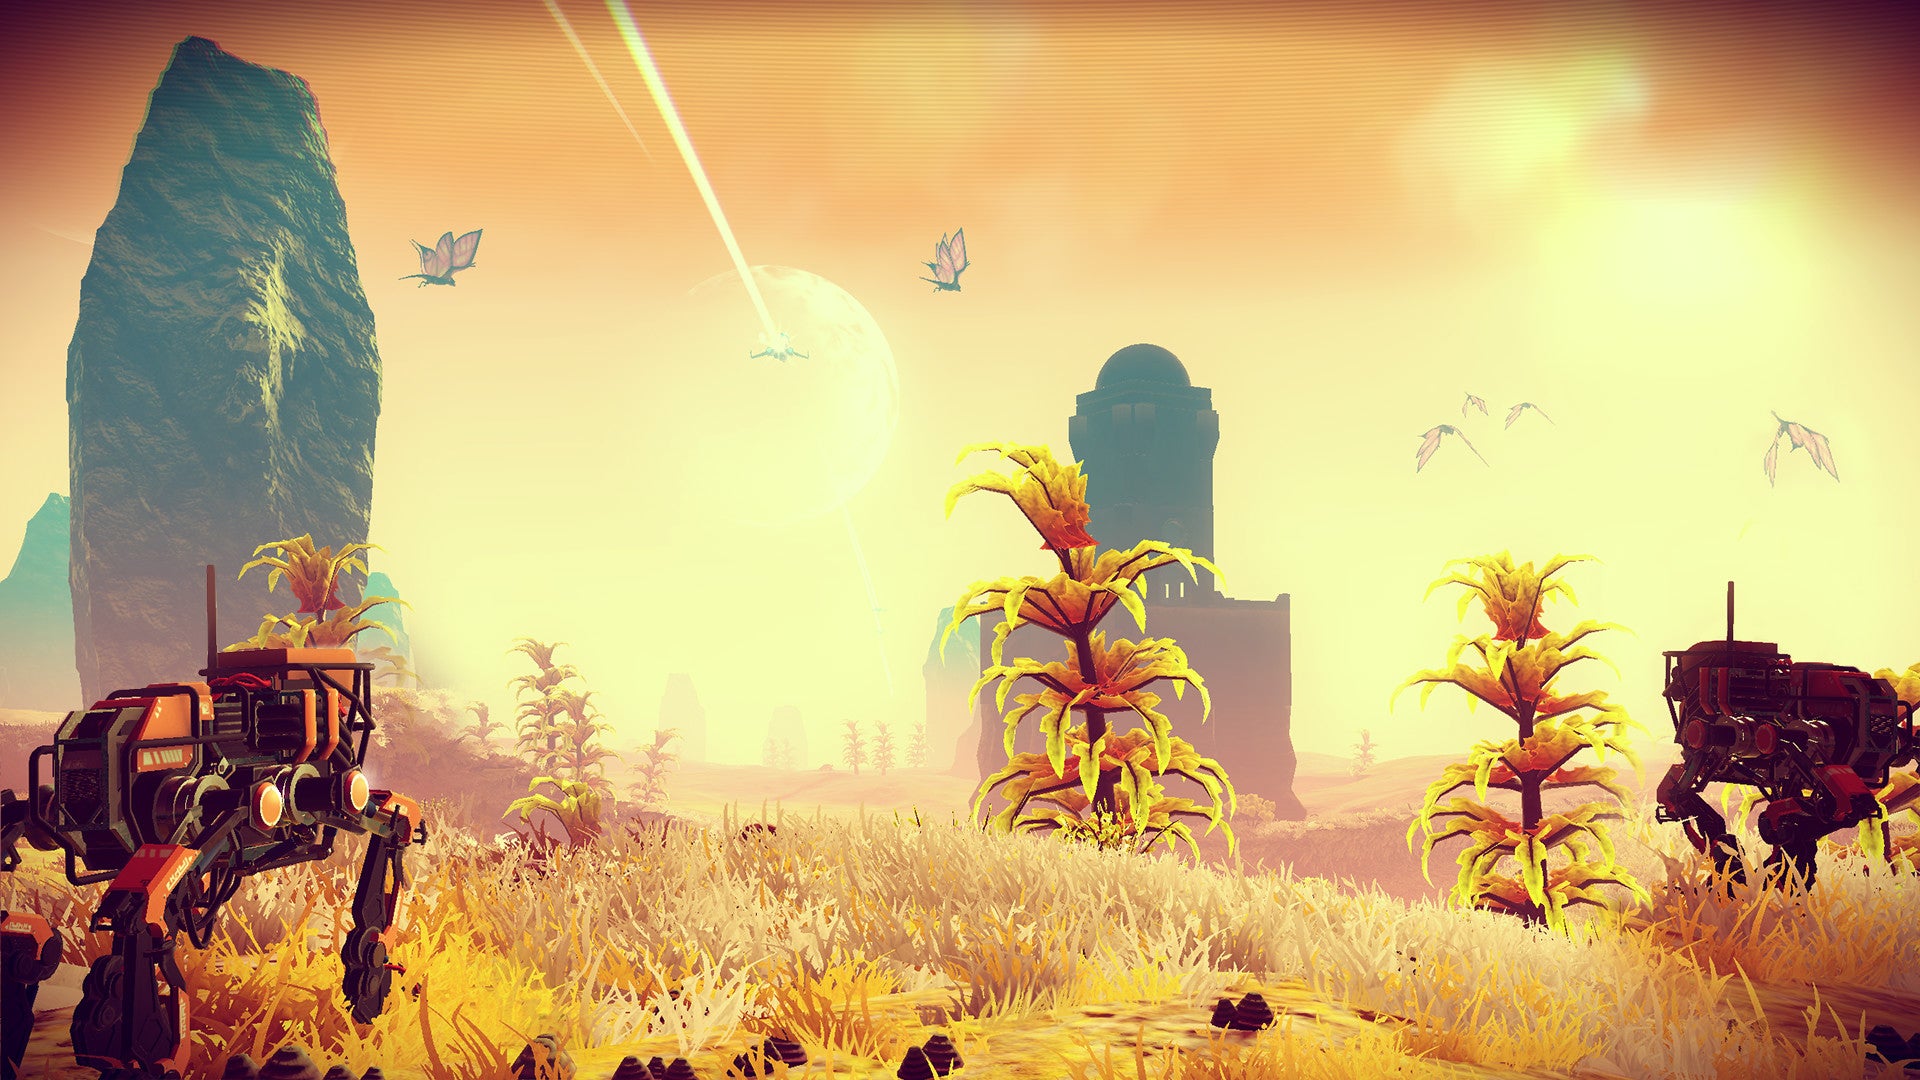 Image for No Man's Sky: Patch 1.23 - PS4 Pro Performance Boosted!